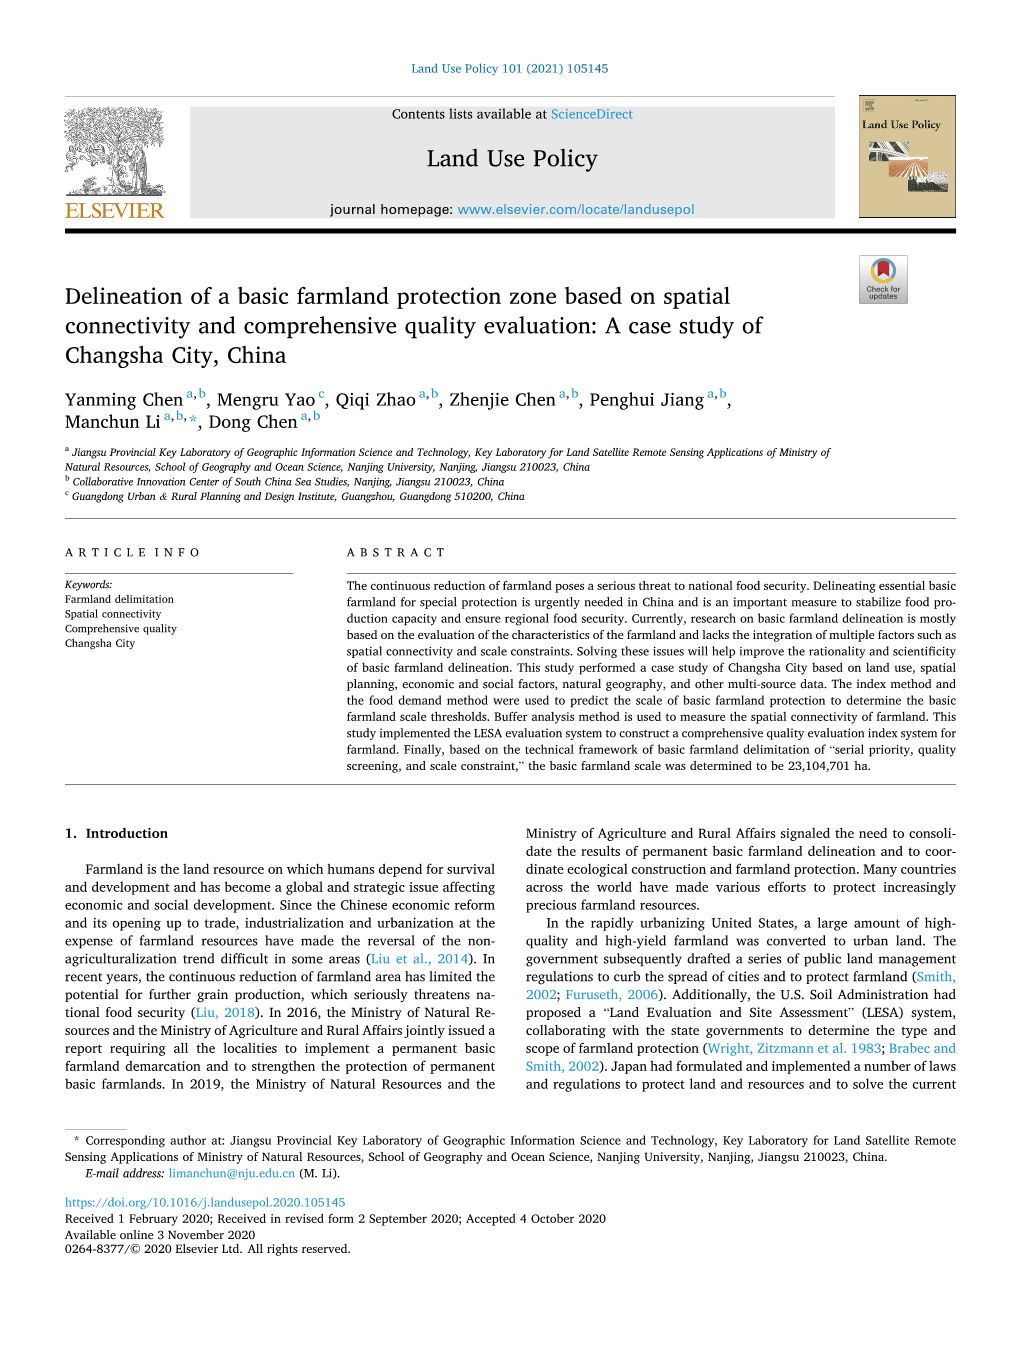 Delineation of a Basic Farmland Protection Zone Based on Spatial Connectivity and Comprehensive Quality Evaluation: a Case Study of Changsha City, China